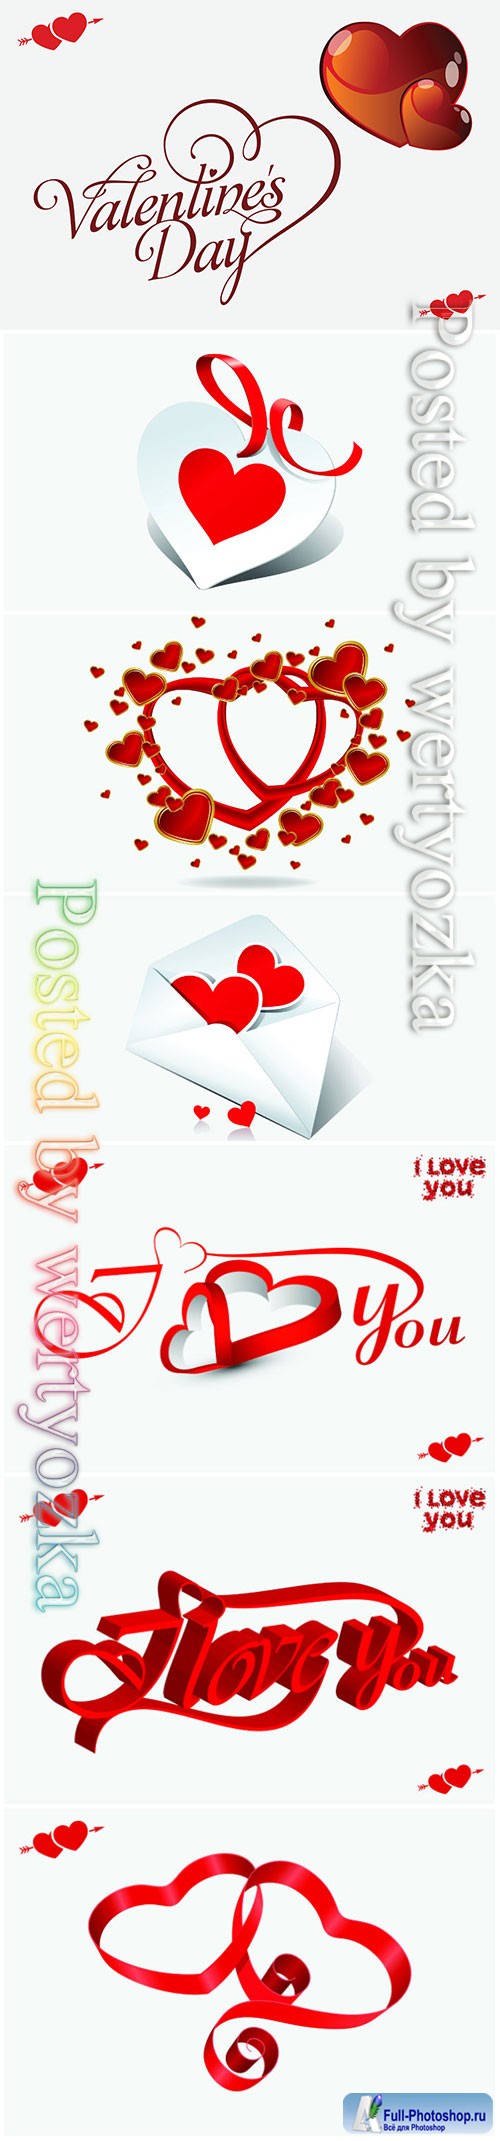 Valentines day vector background with heart # 2